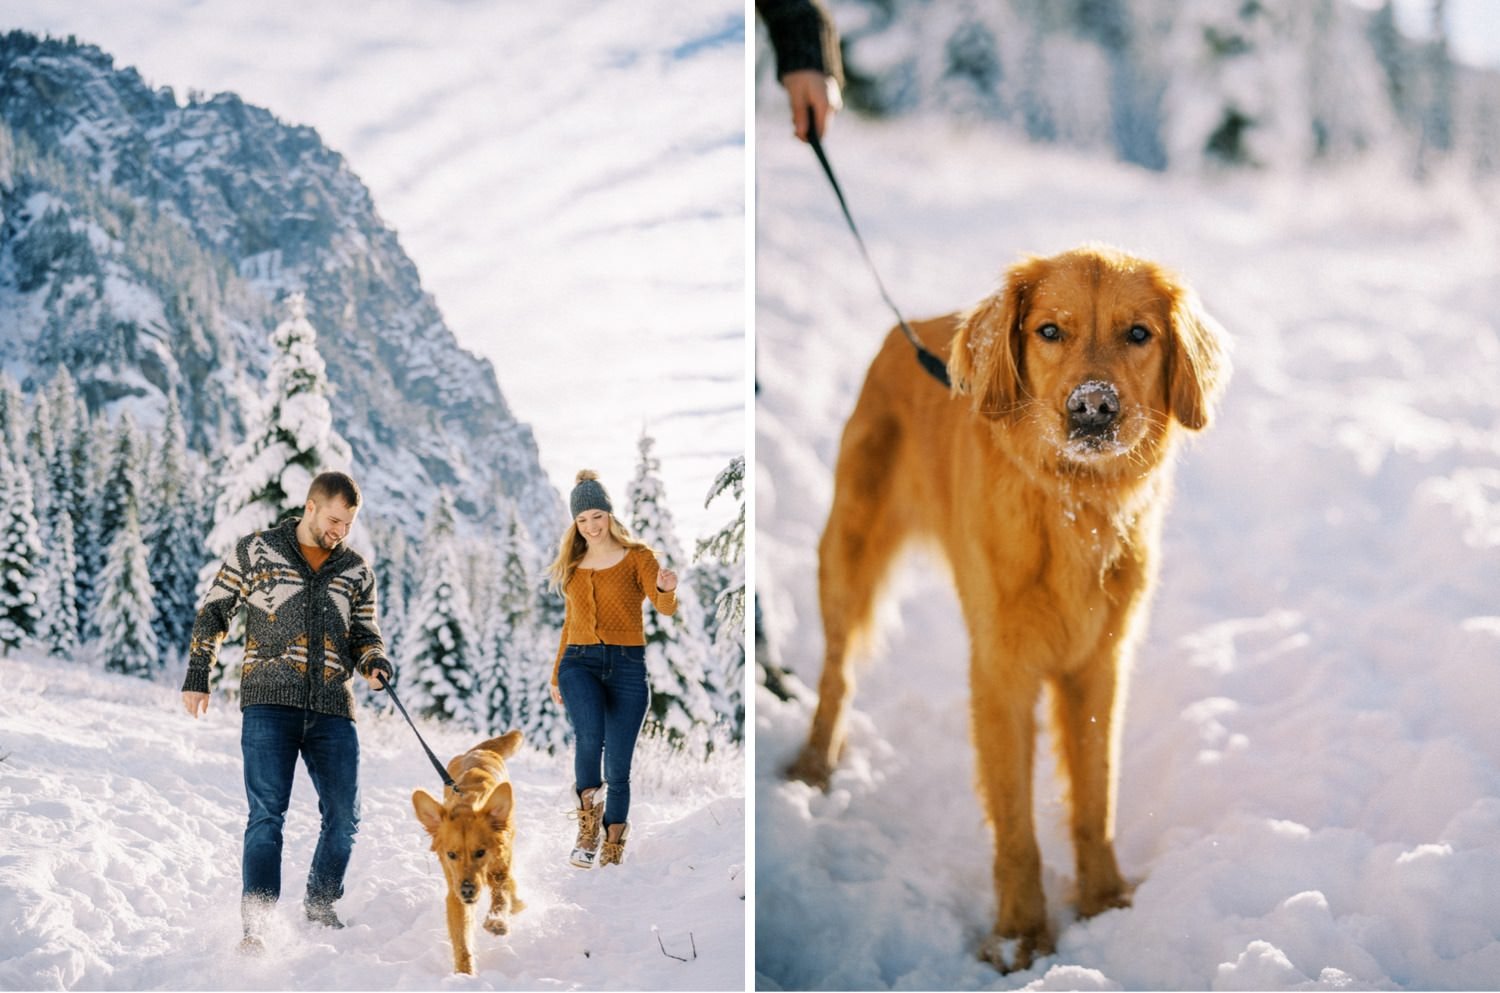 14_Snowy engagement photos at Snoqualmie Pass near Seattle, with a film-like style by Ryan Flynn Photography.jpg